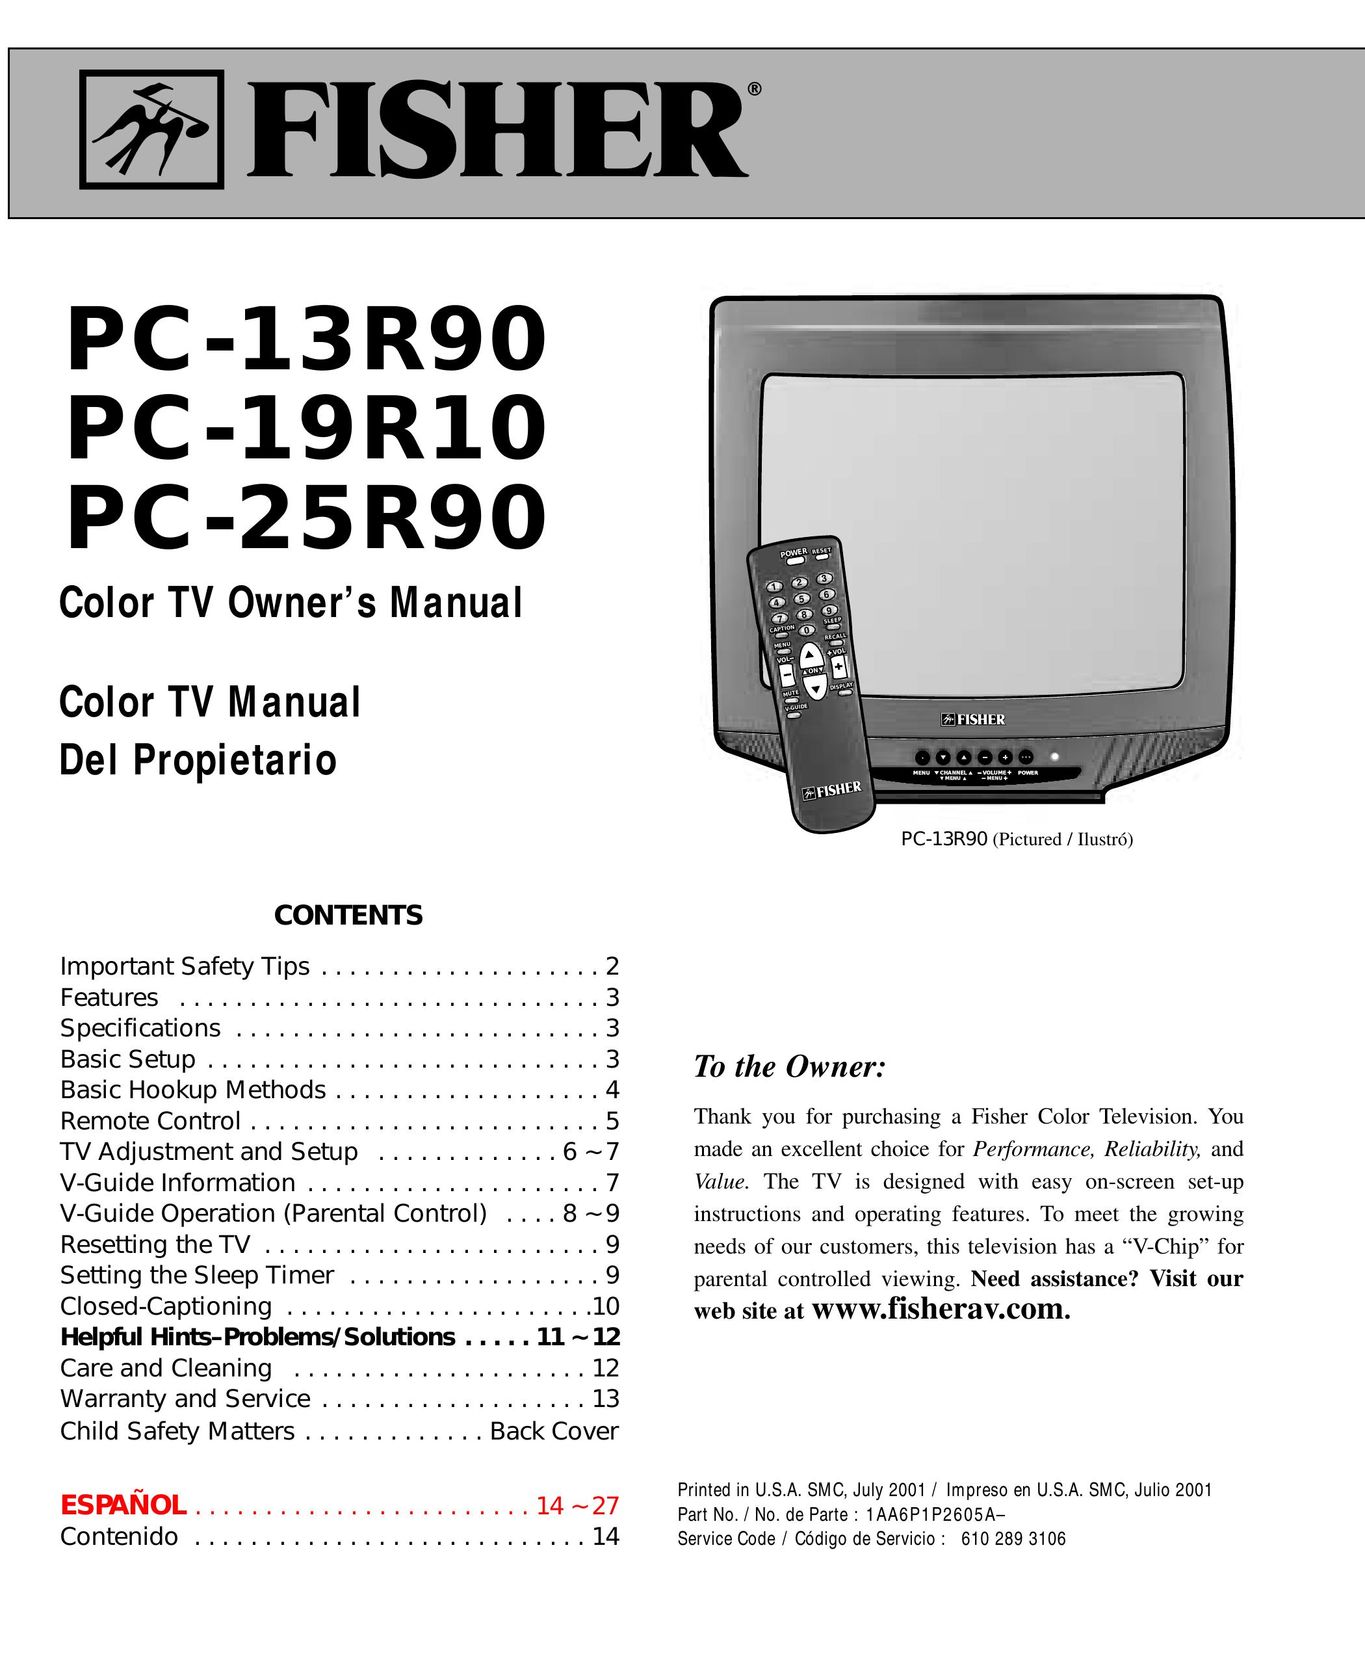 Fisher PC-25R90 CRT Television User Manual